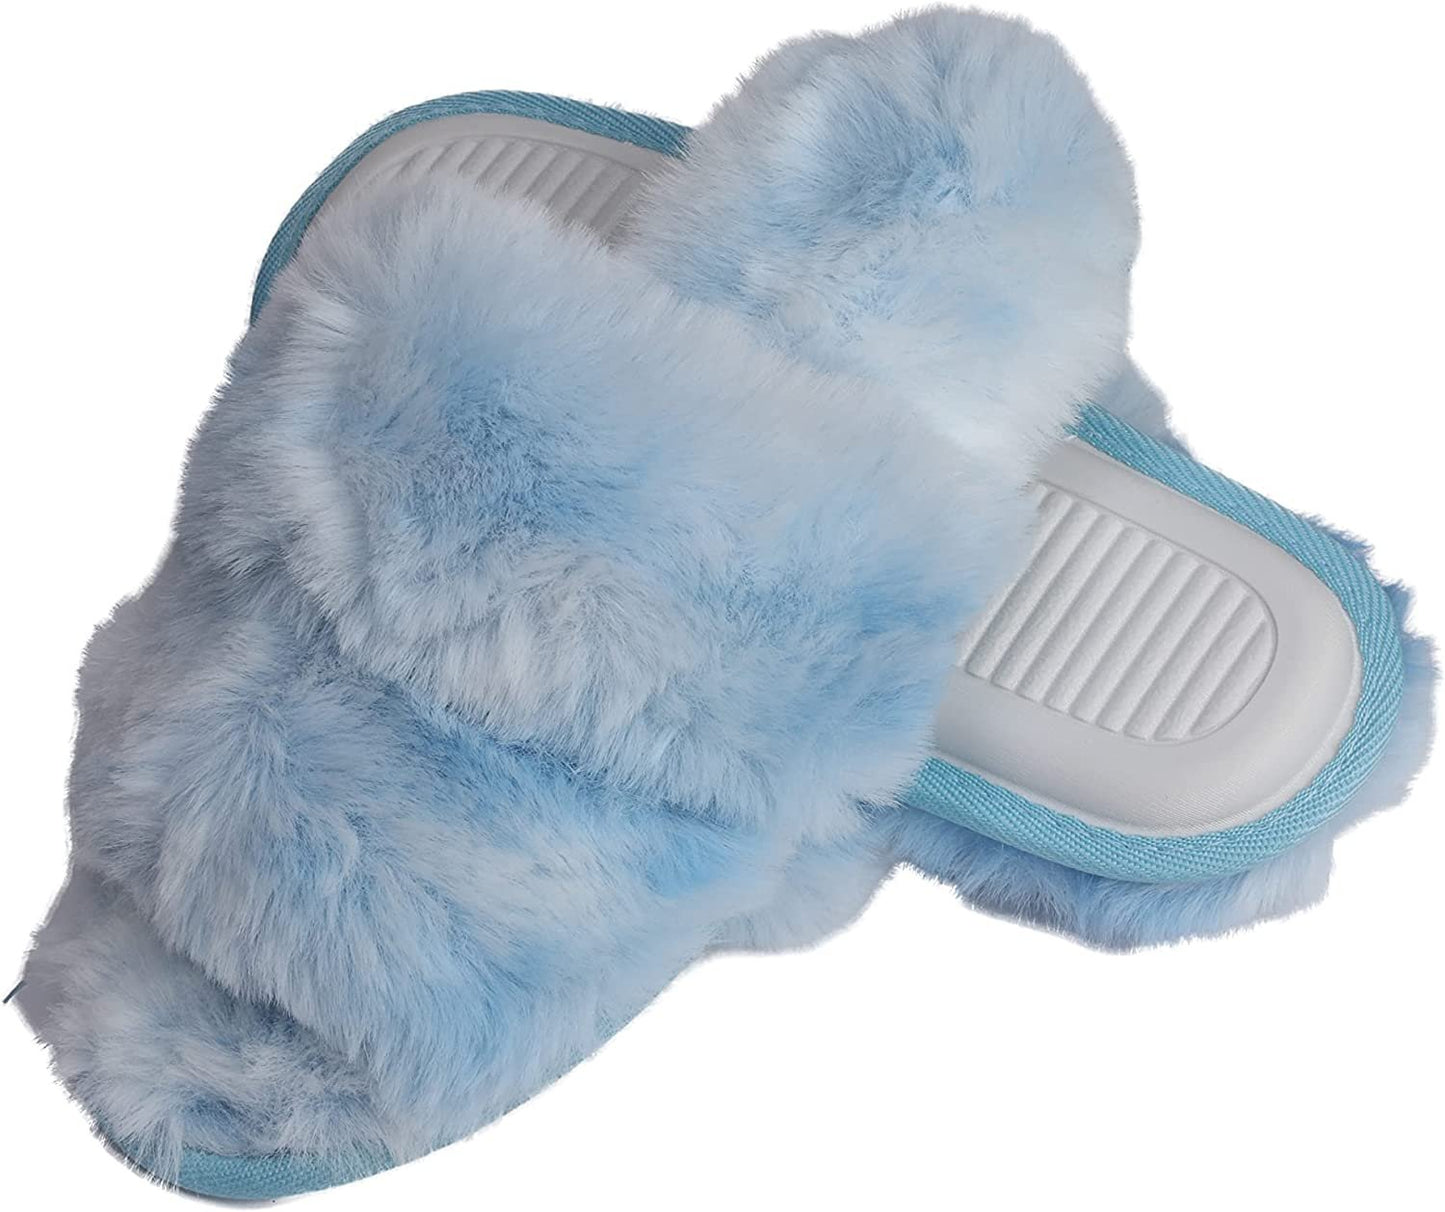 Roxoni Faux Fur Tie & Dye Slippers – Stylish & Trendy Slip-ons for Women – Super Soft Fluffy Fur for Superior Comfort & Luxury